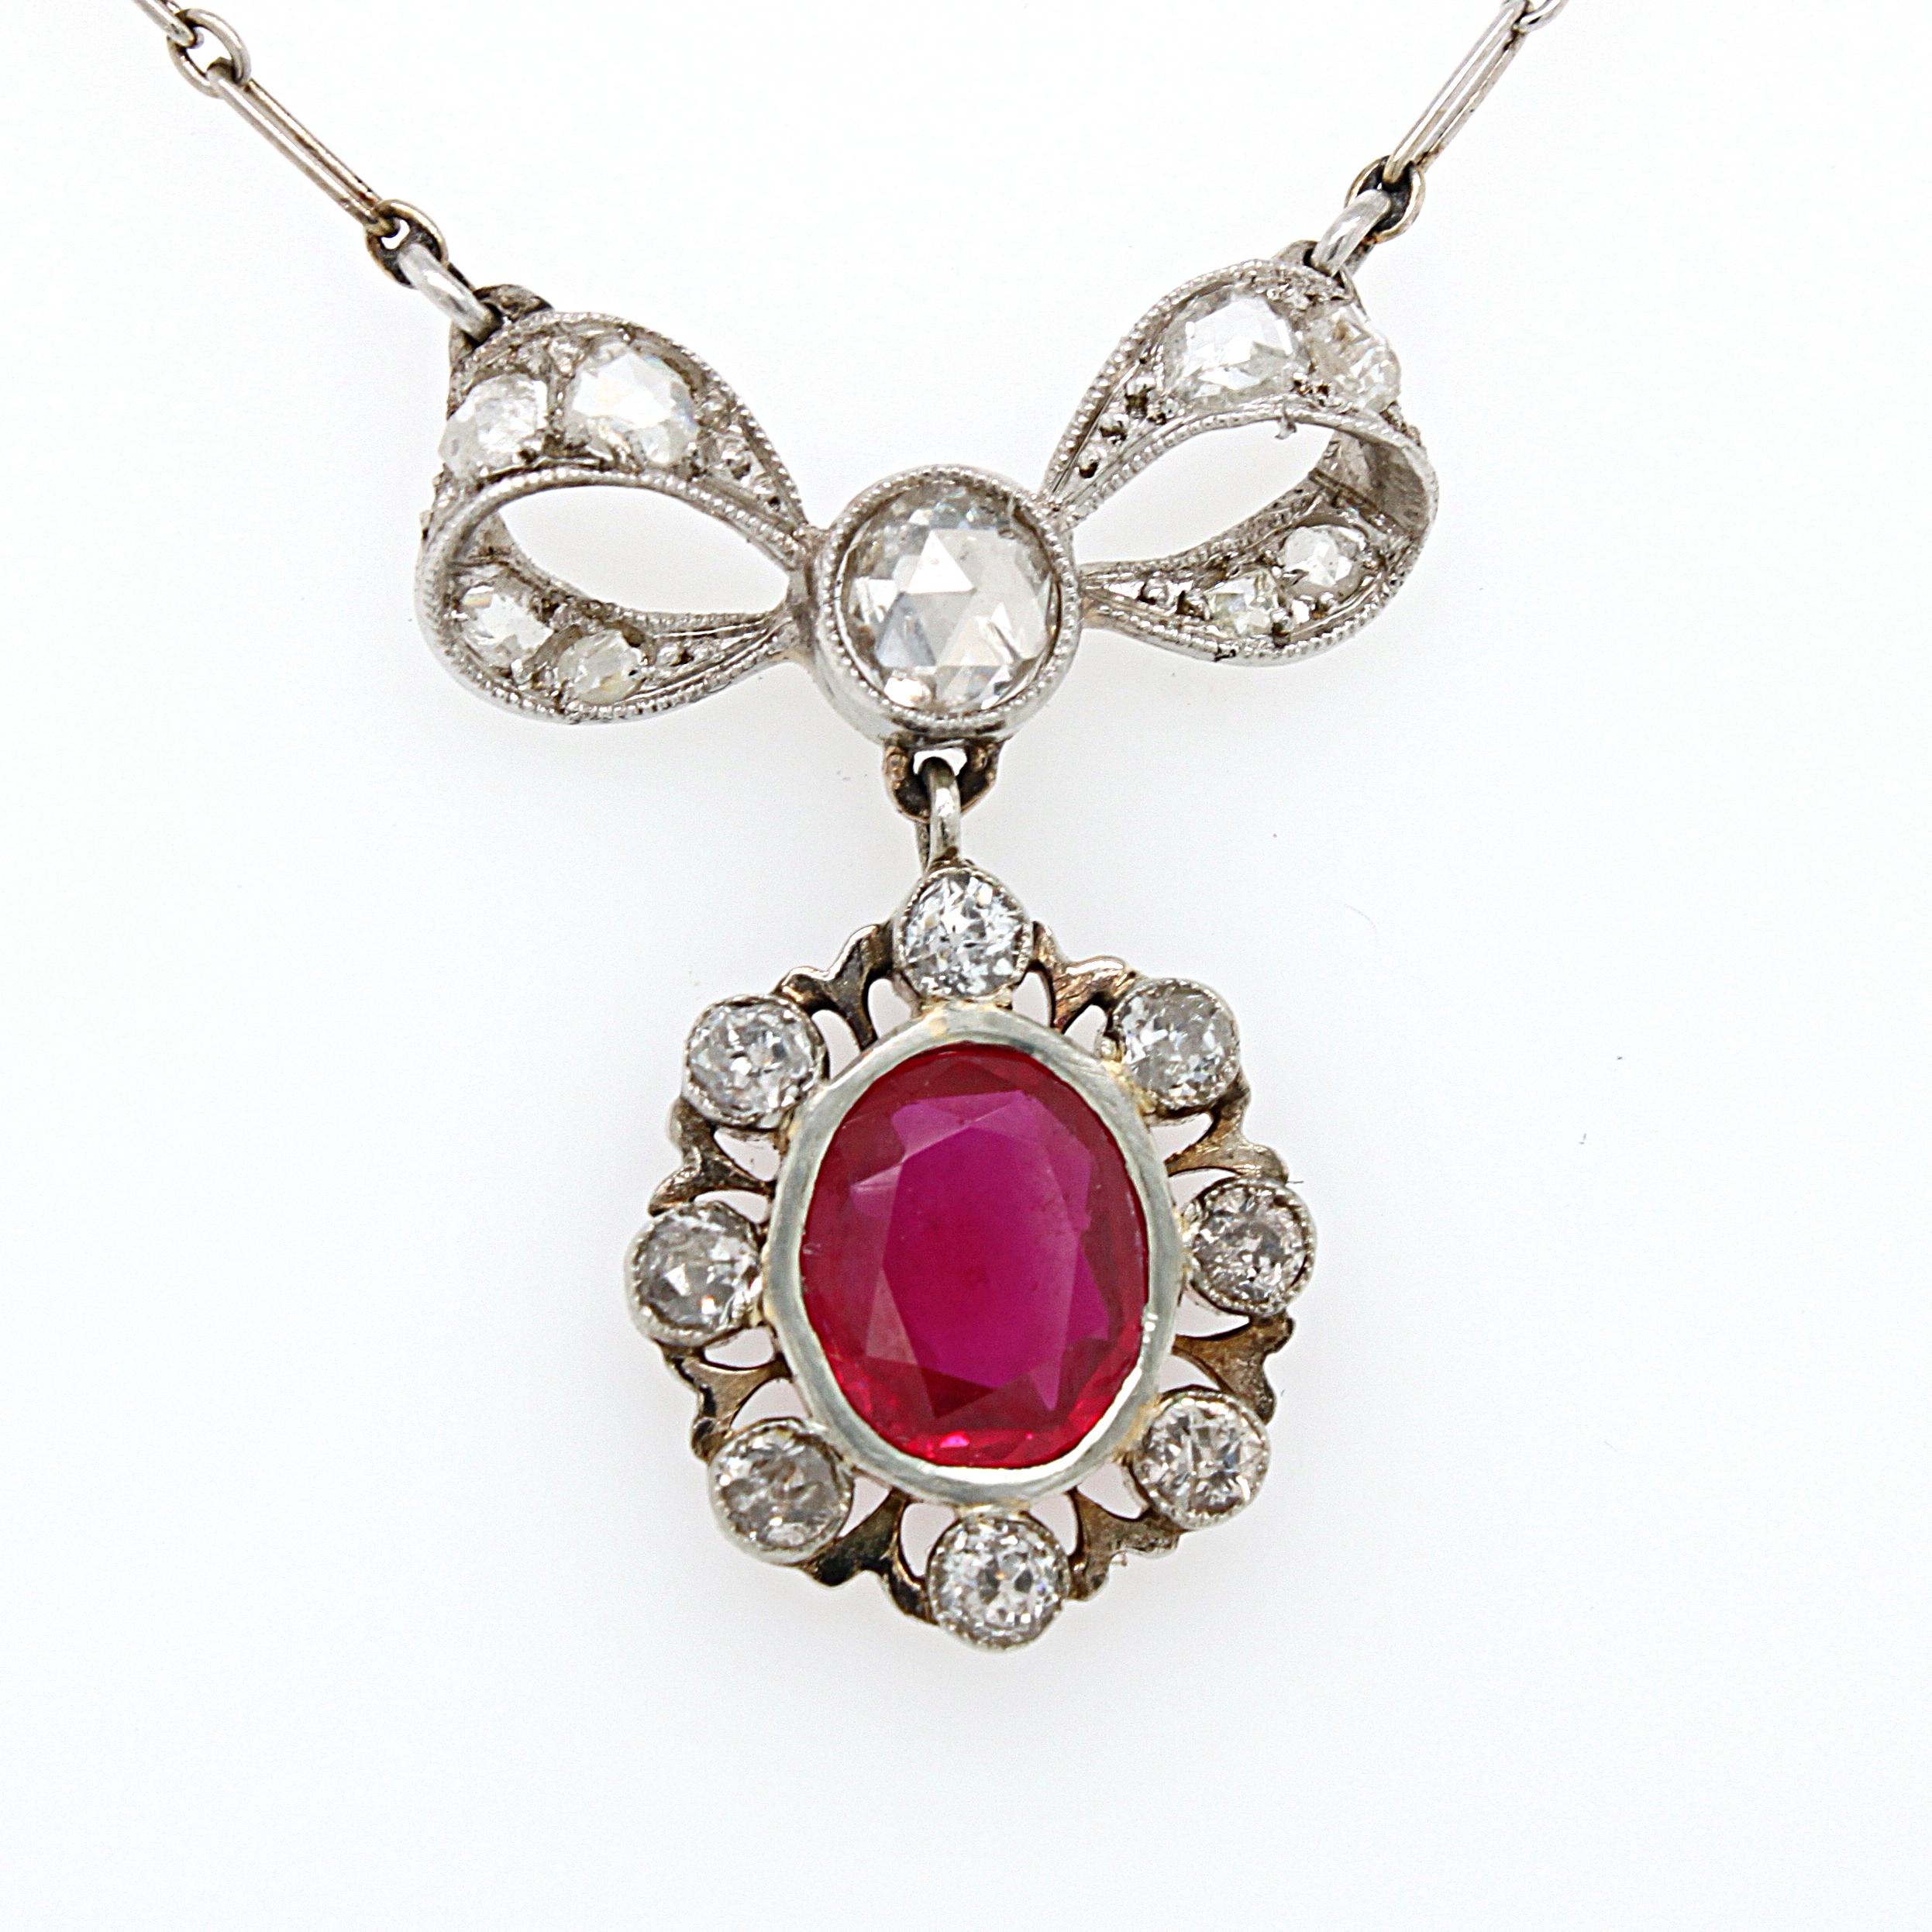 A lovely Belle Époque ruby and diamond bow necklace, ca. 1910s. The pendant is attached to a white gold chain, with the top part set with rose cut diamonds in a bow shape. The lower part is set with a beautiful ruby, which surrounded by round old